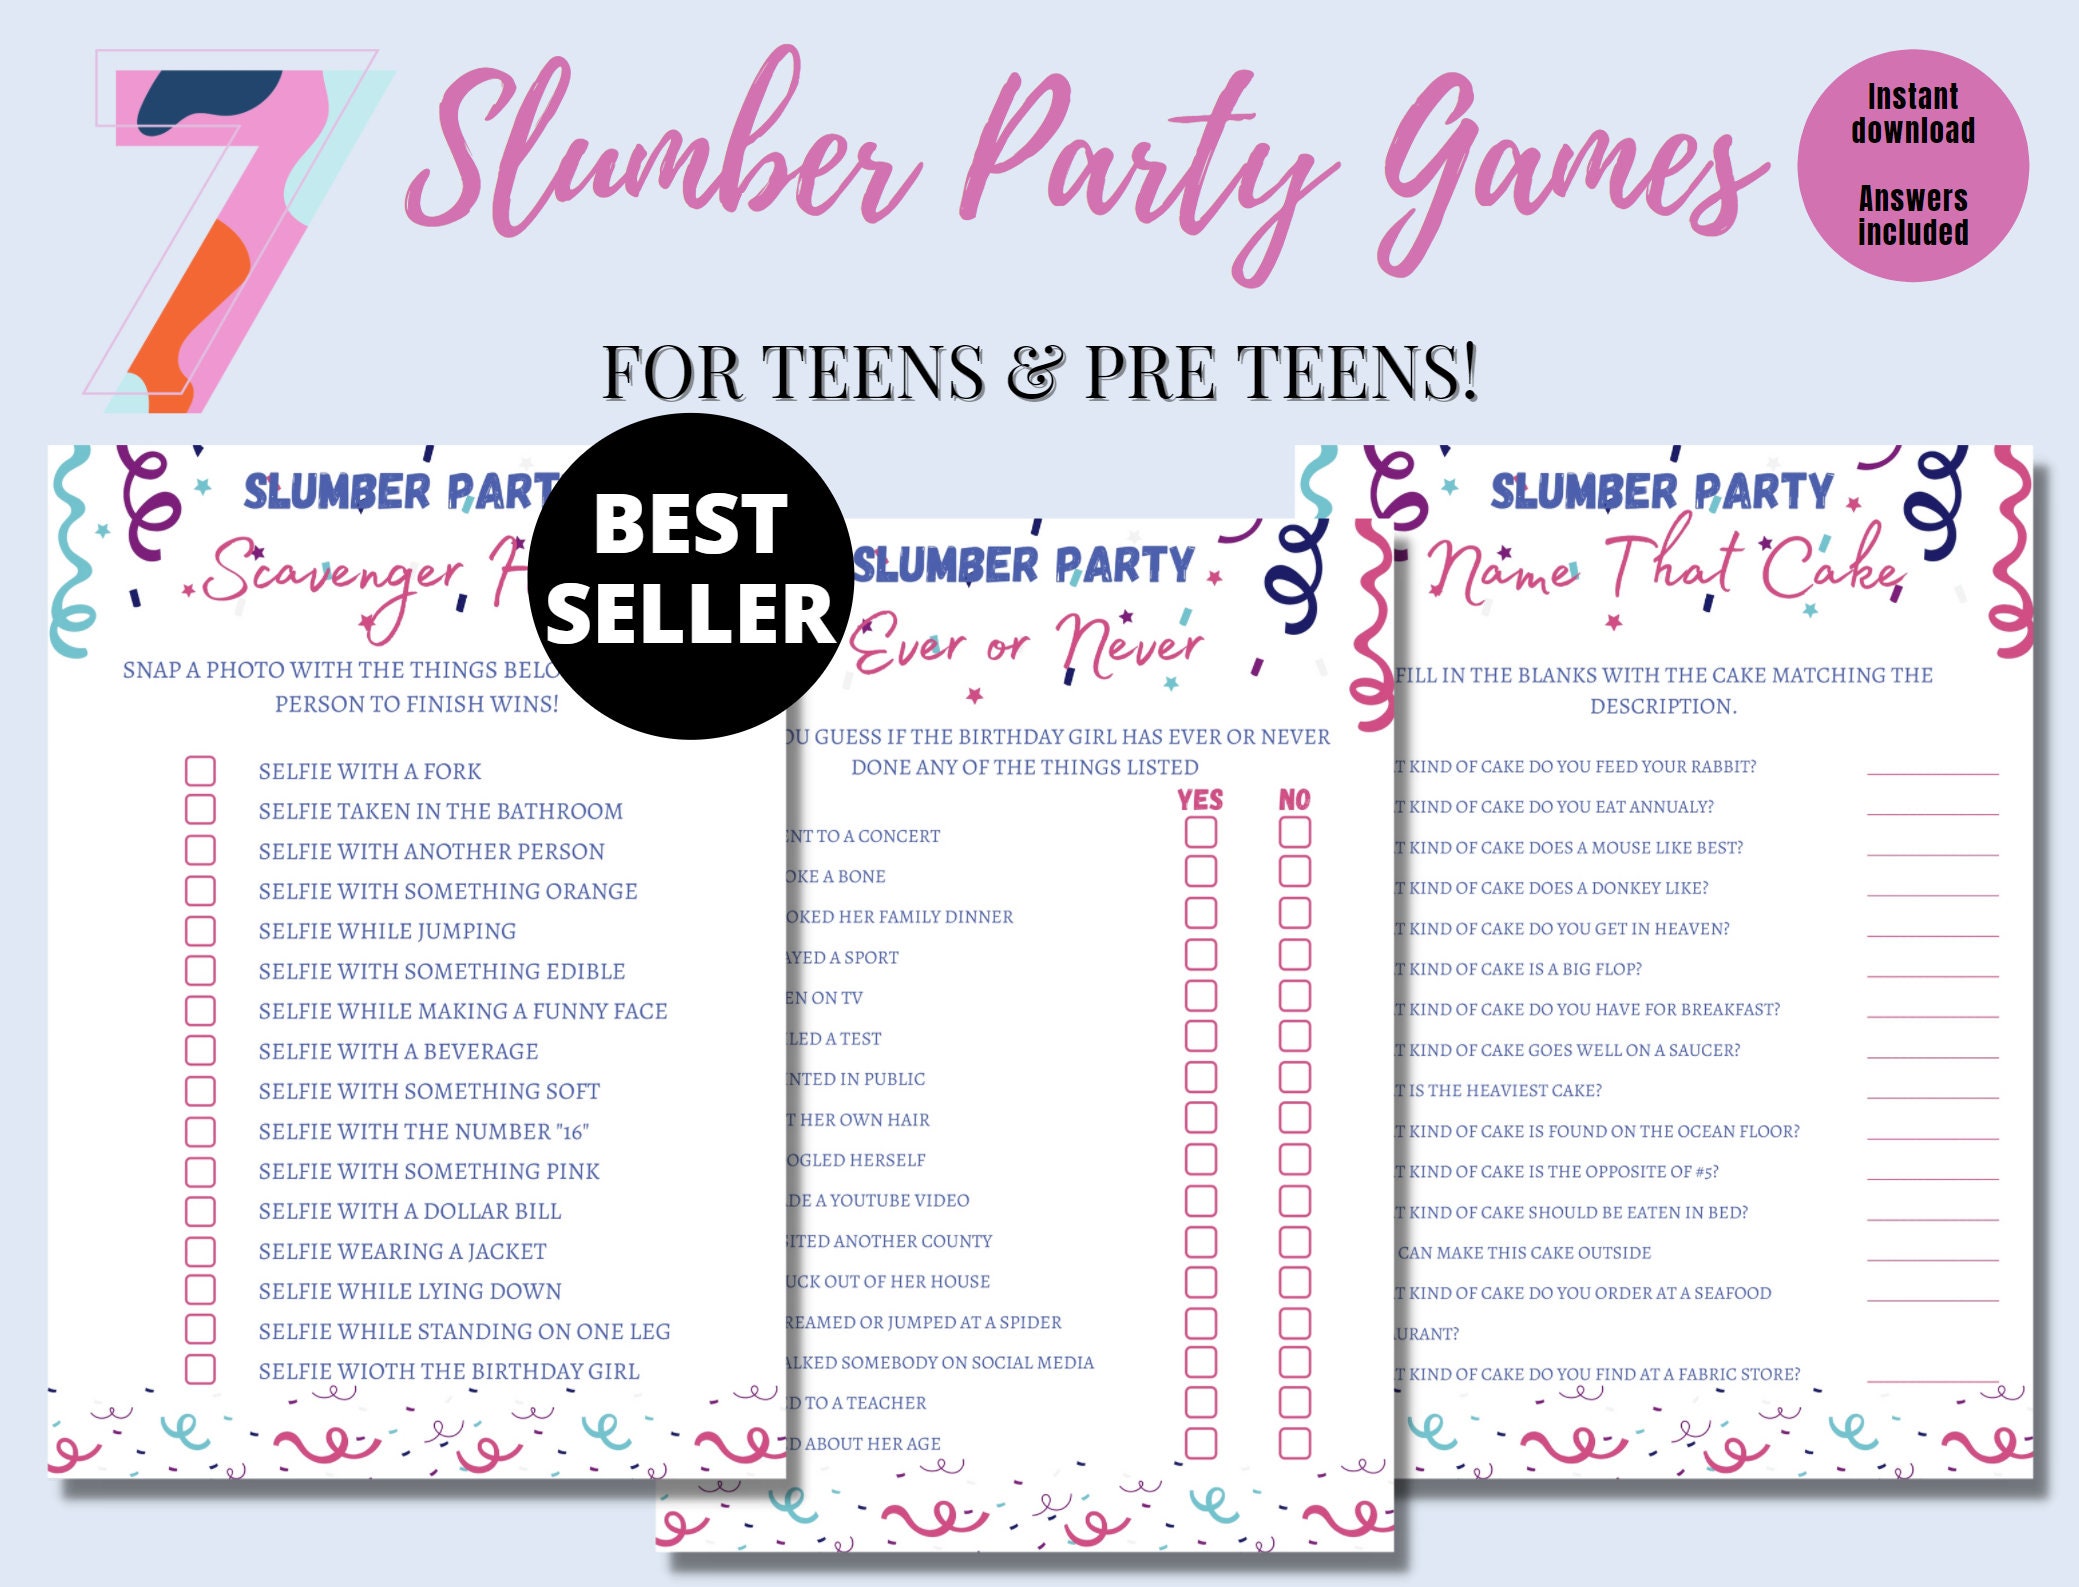 Teen Slumber Party Games Girl Birthday Birthday for photo picture